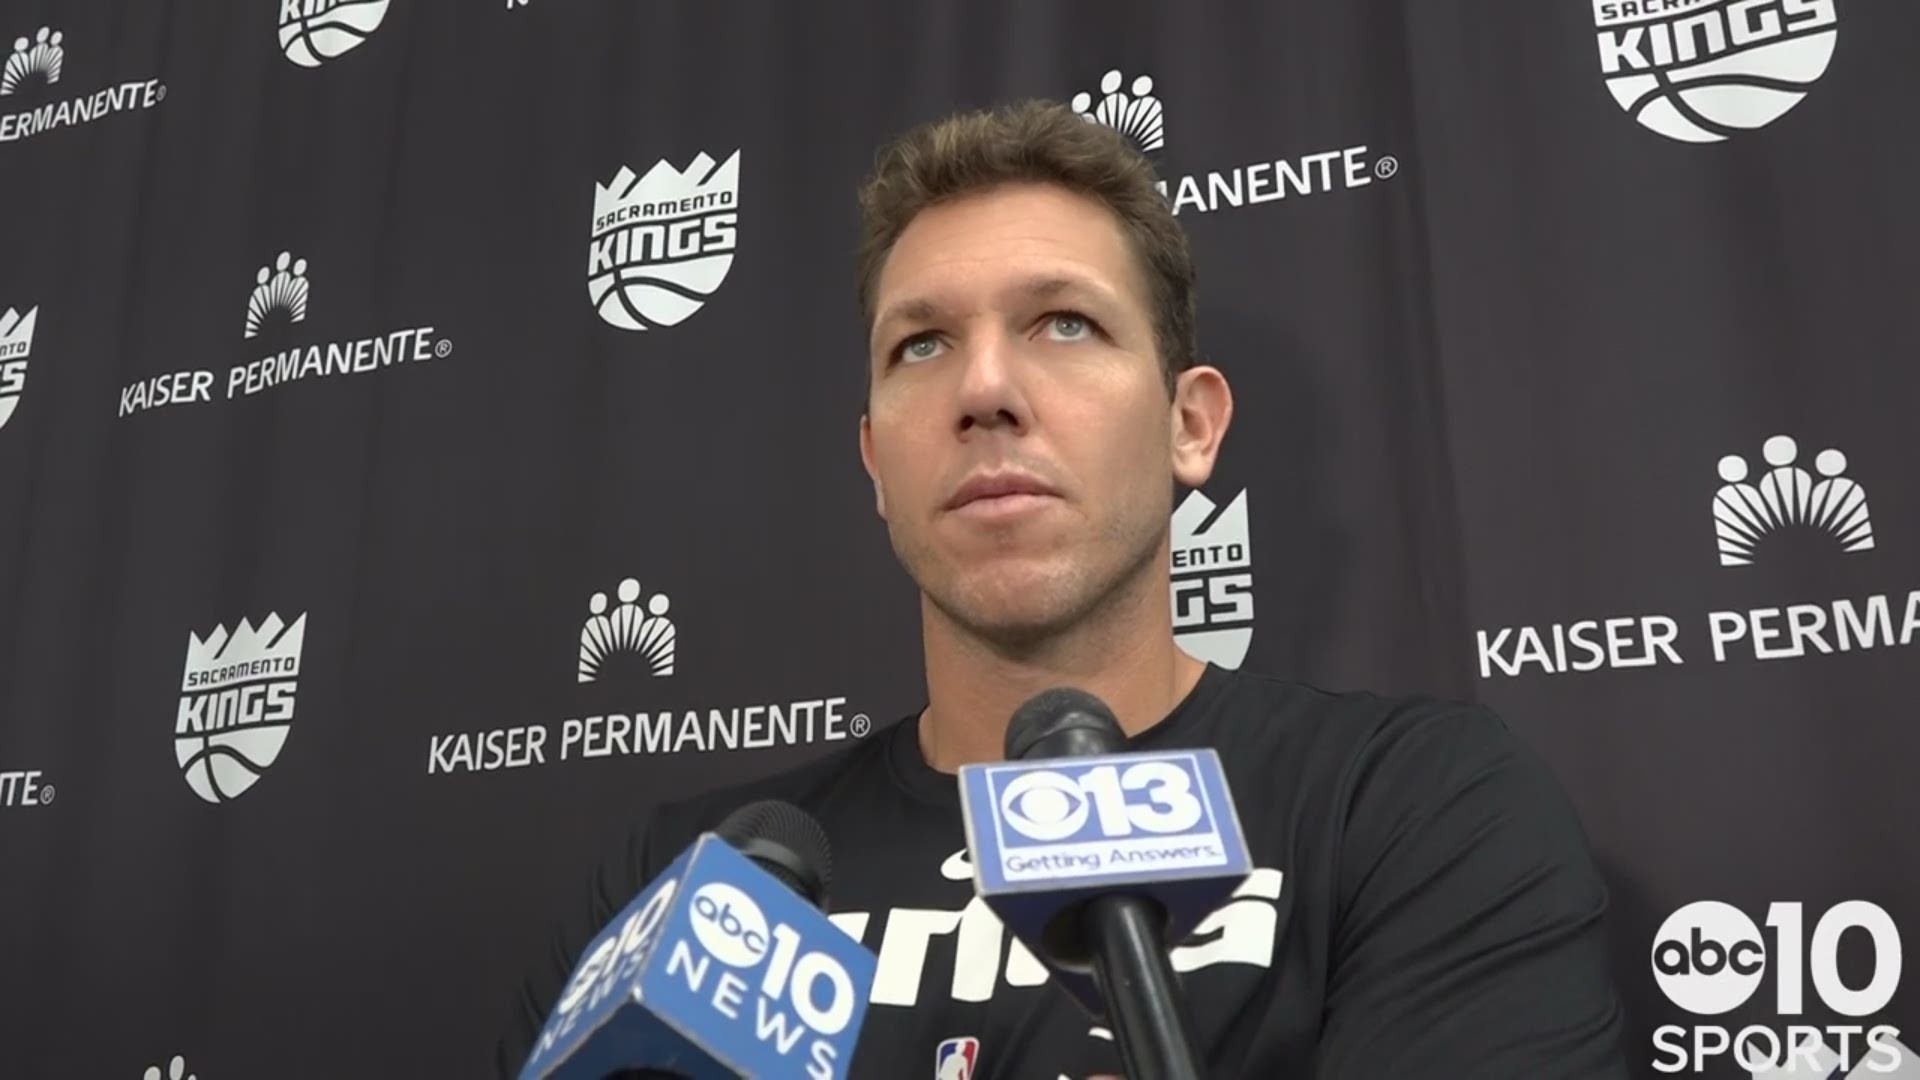 Kings coach Luke Walton talks about adjustments being made before the next preseason test in Utah against the Jazz and recent contract comments made by Buddy Hield.